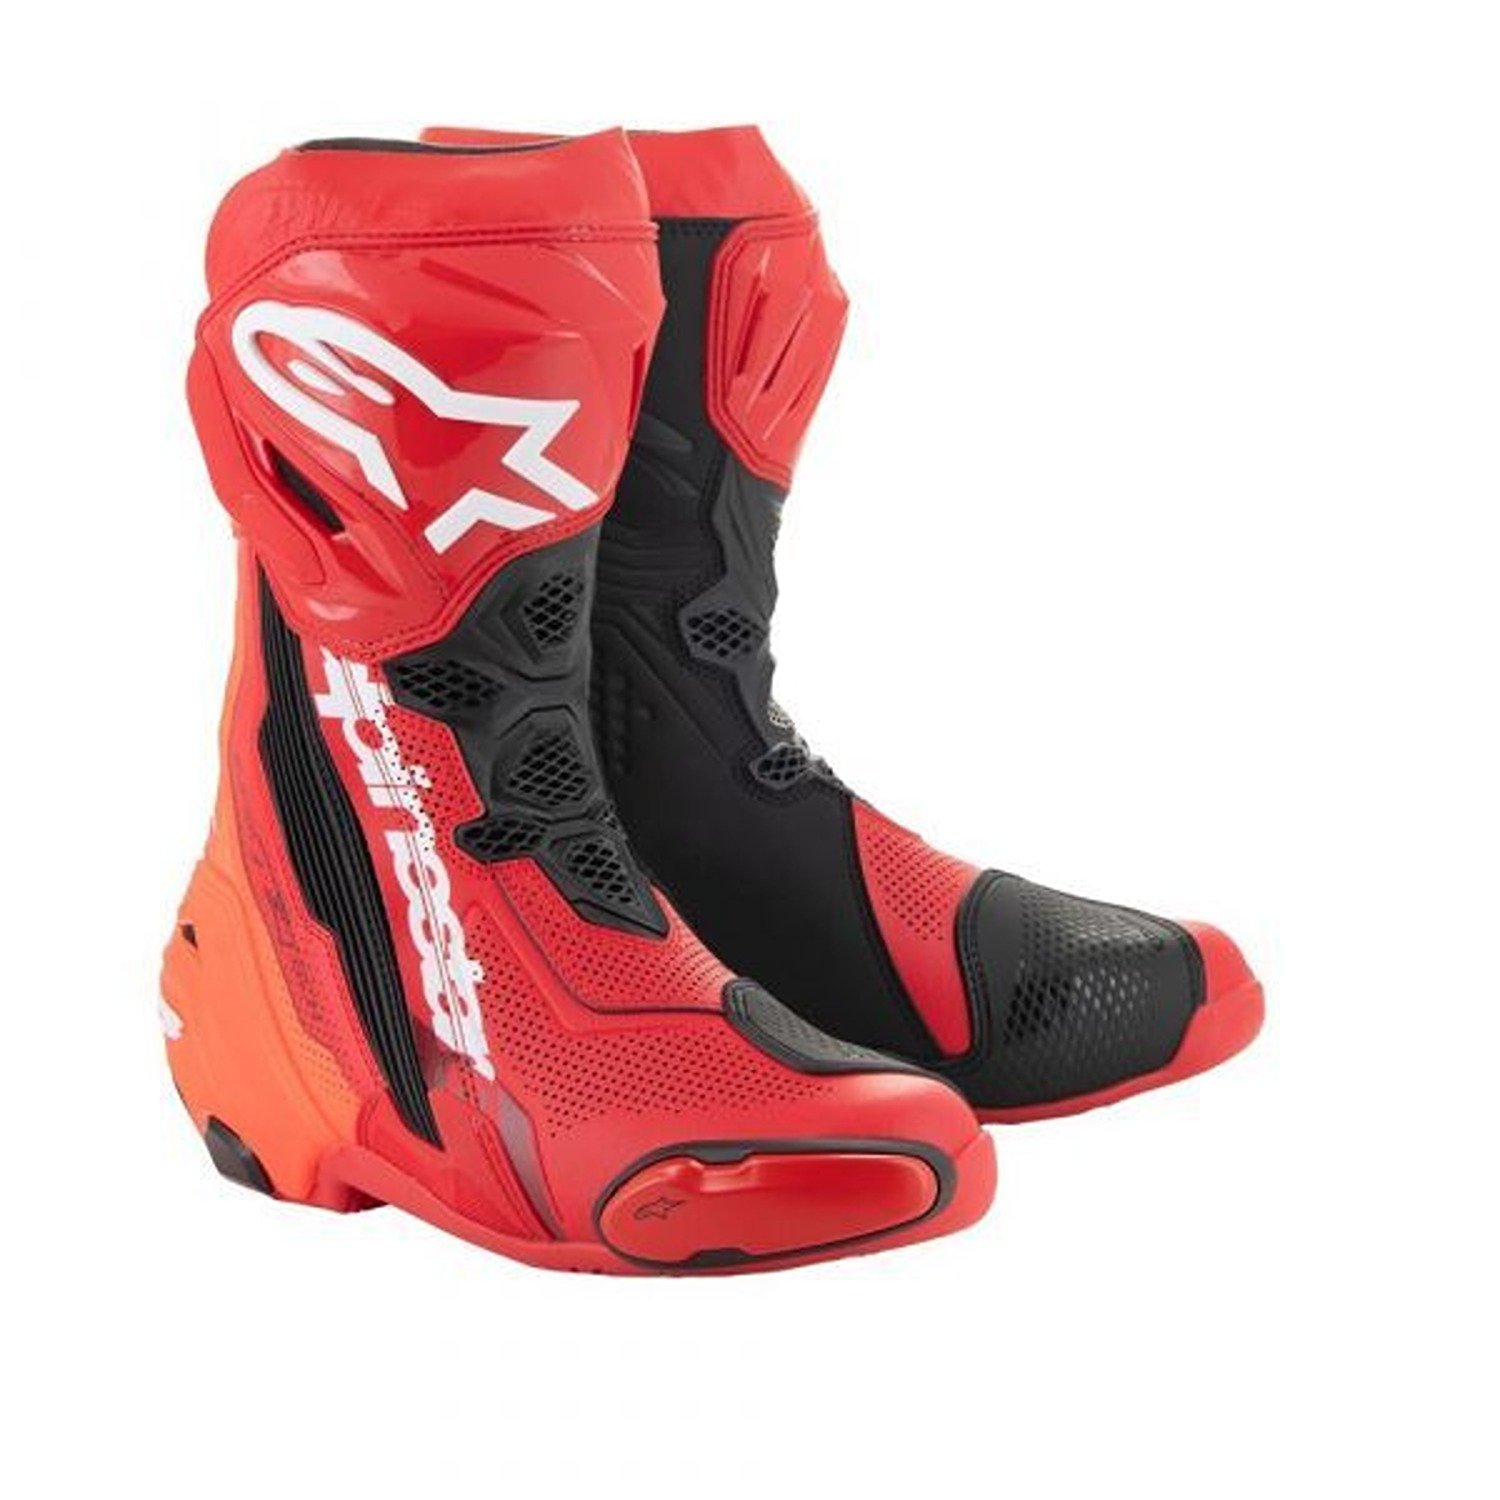 Image of Alpinestars Supertech R Vented Boots Bright Red Red Fluo Größe 46